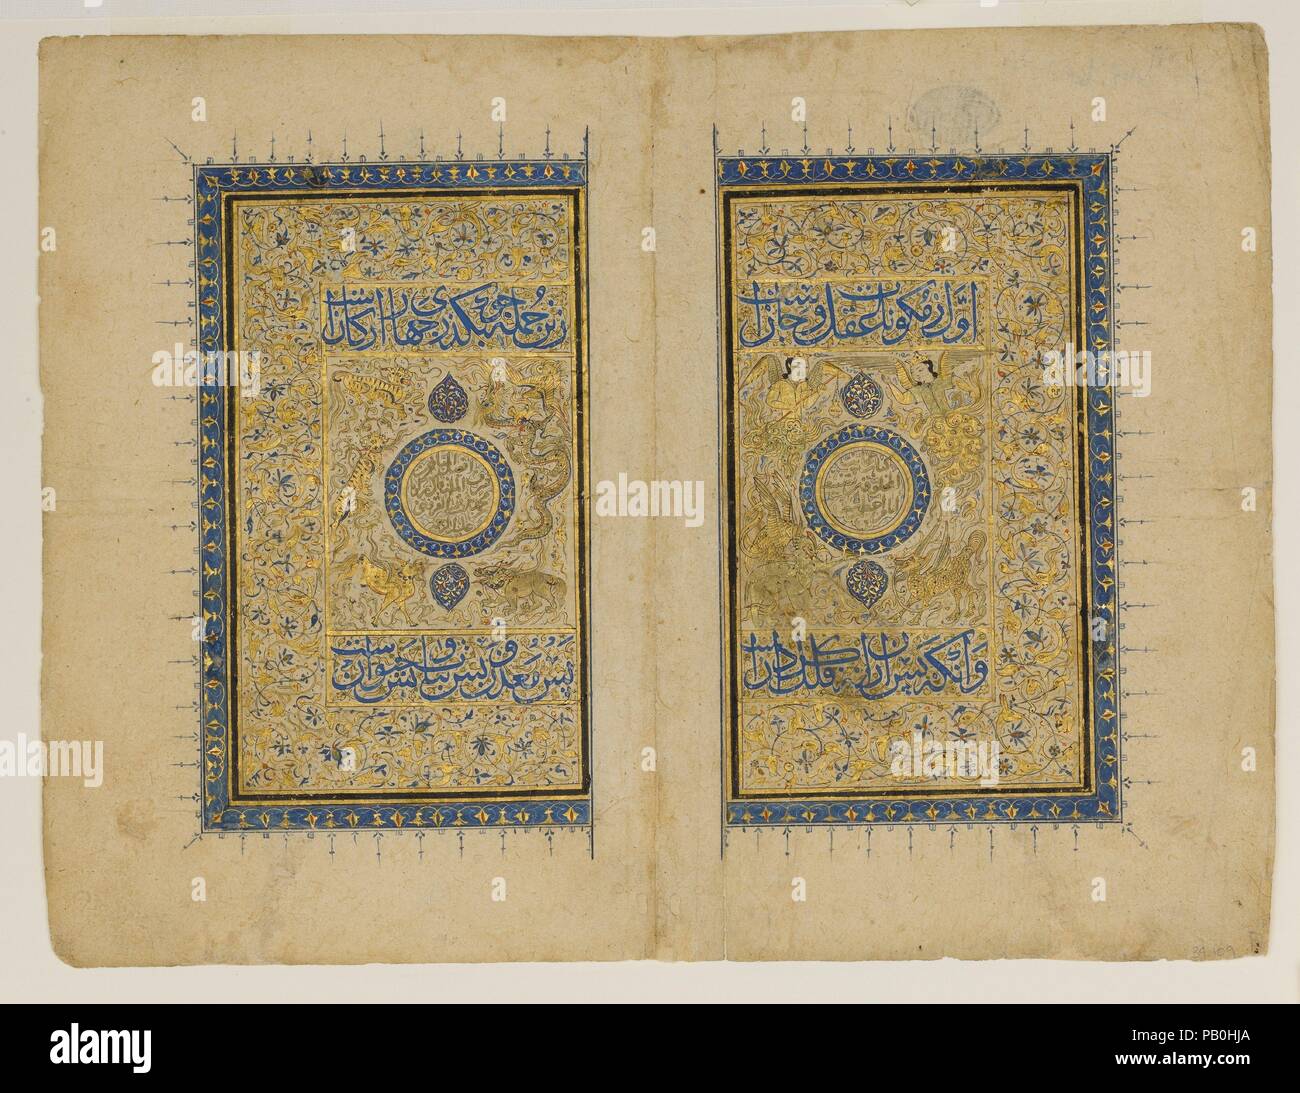 Double Title Page from a `Aja'ib al-Makhluqat wa Ghara'ib al-Mawjudat (The Wonders of Creation and the Oddities of Existence). Author: Zakaria bin Muhammad bin Mahmud Abu Yahya Qazwini (ca. 1203-83). Dimensions: Ht. 11 3/4 in. (29.8 cm)  W. 8 7/8 in. (22.5 cm). Date: 1414-35.  The Marvels of Creation contained information on various aspects of the heavens, the earth and its minerals, plants, birds and animals, as well as unusual phenomena and imaginary creatures. A rukh (roc) or 'anqa (fabulous bird) attacking an elephant and a karkadann (rhinoceros) can be seen to the right of each medallion, Stock Photo